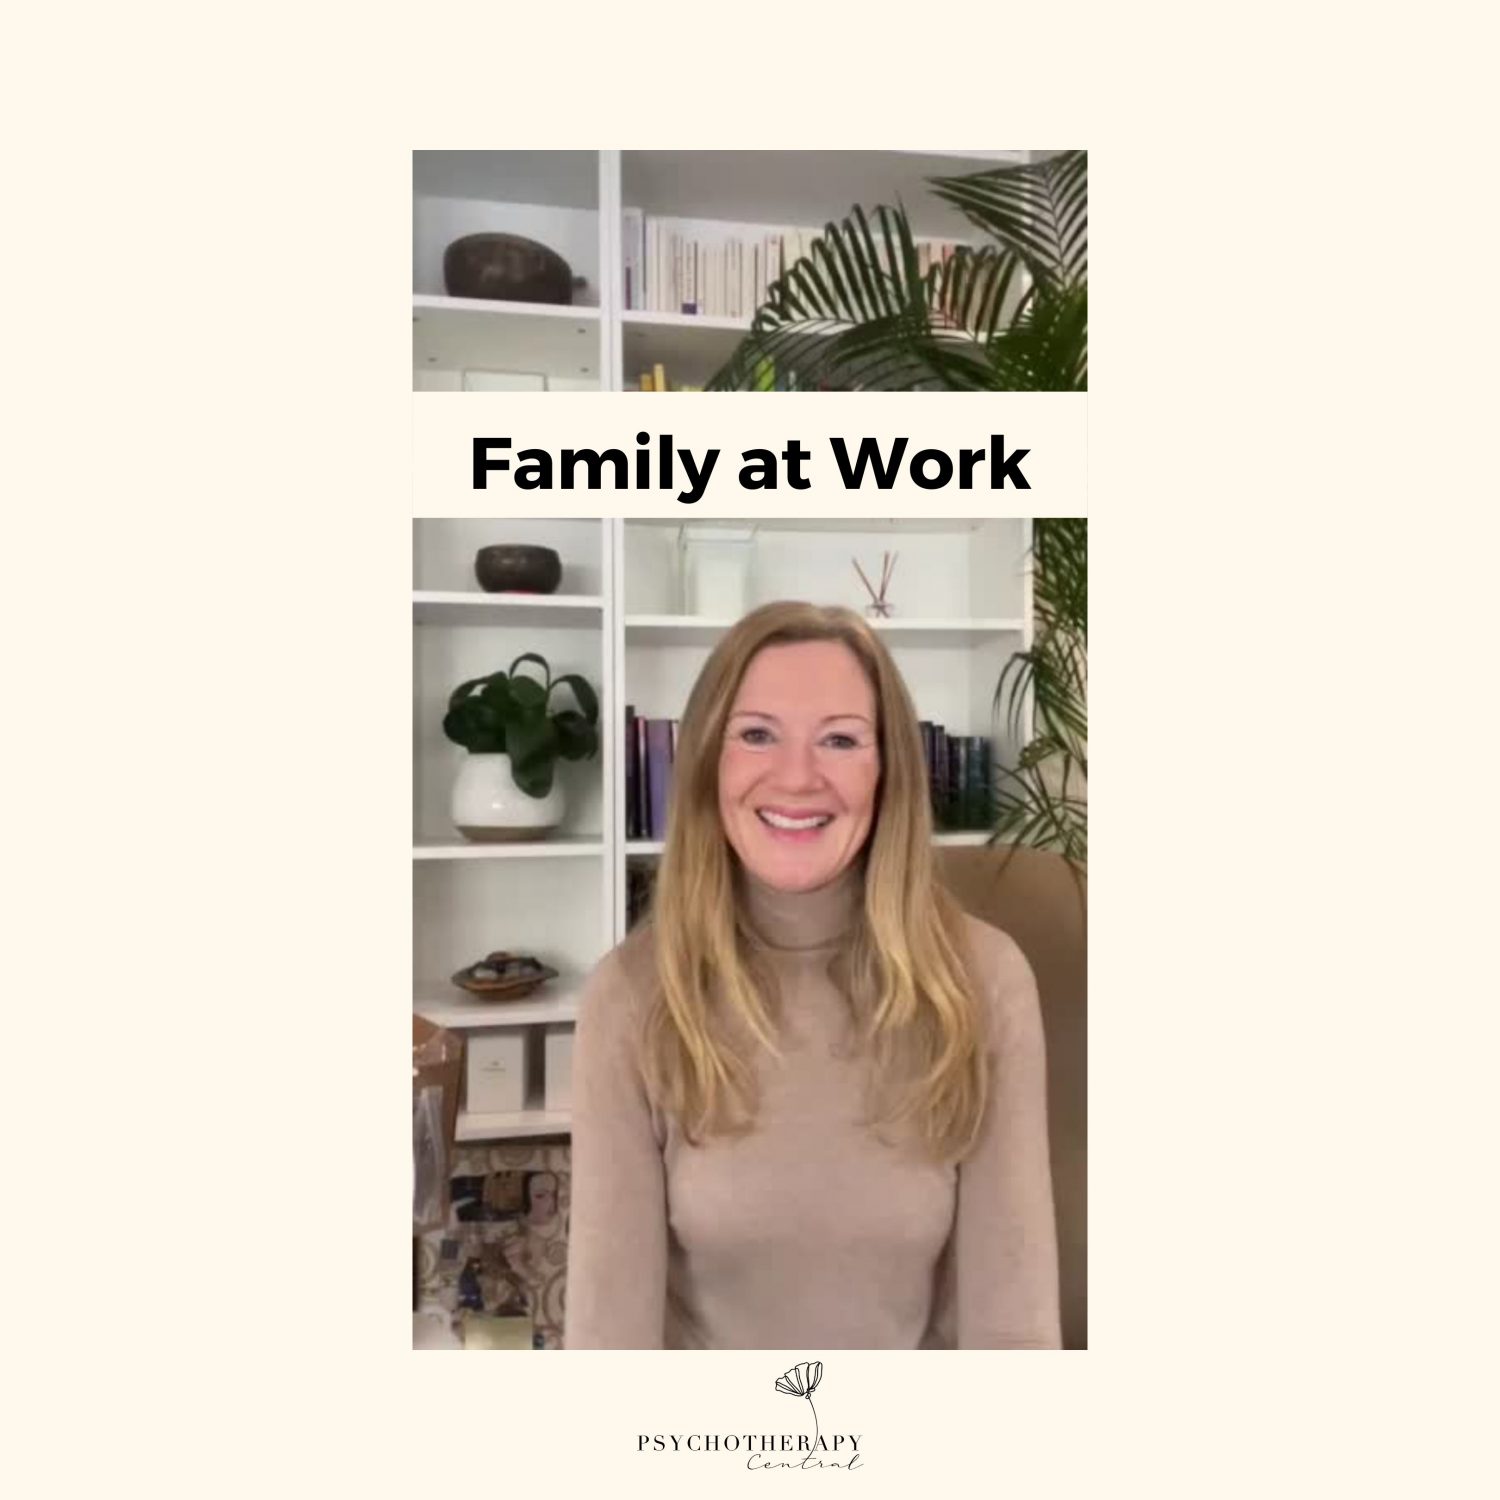 Family Dynamics in the workplace